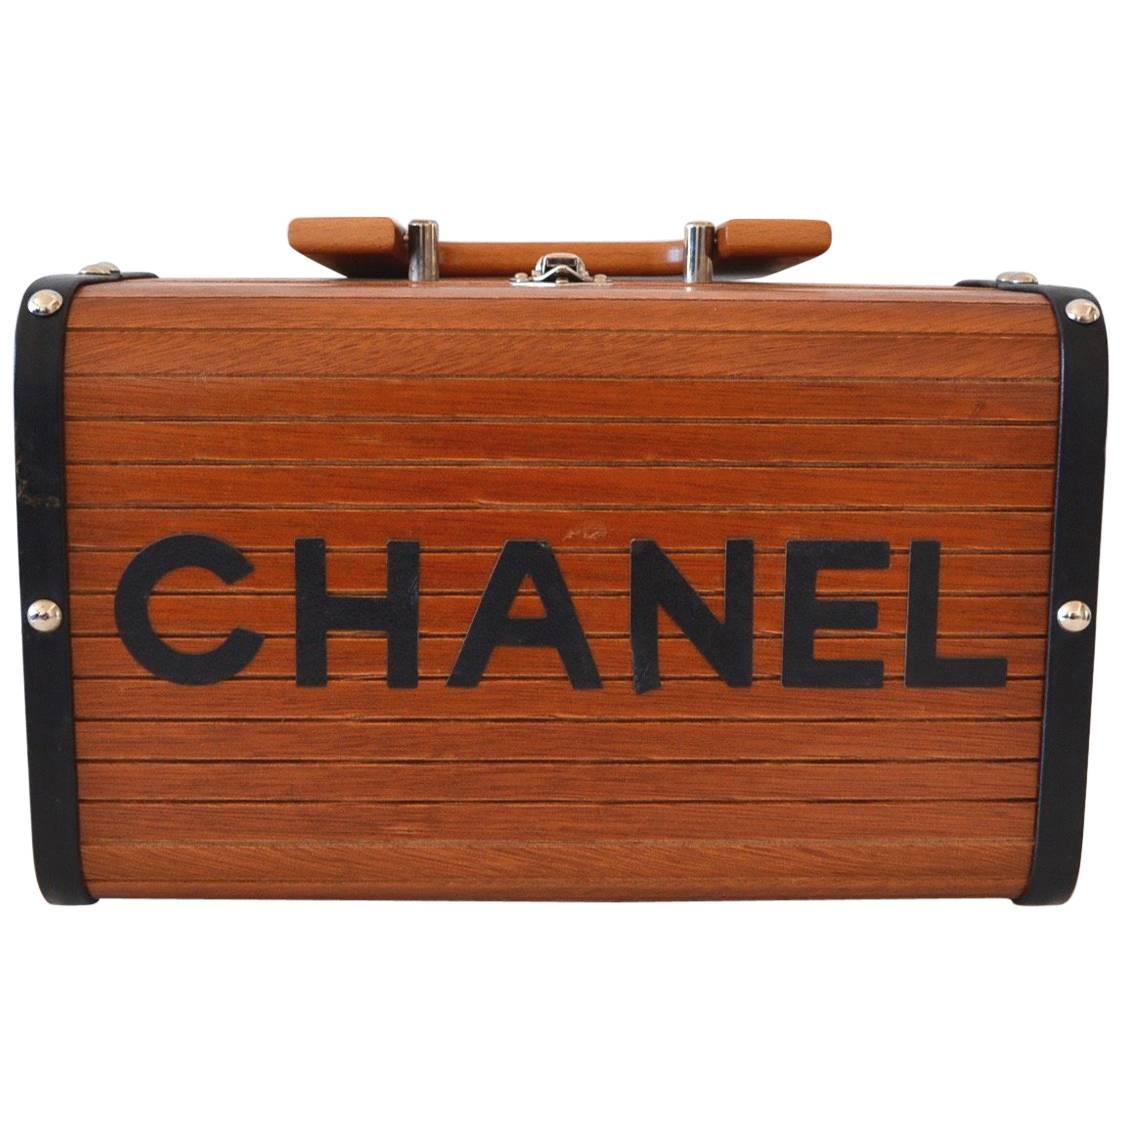 Chanel Mini Trunk Limited Edition 1996 For Sale